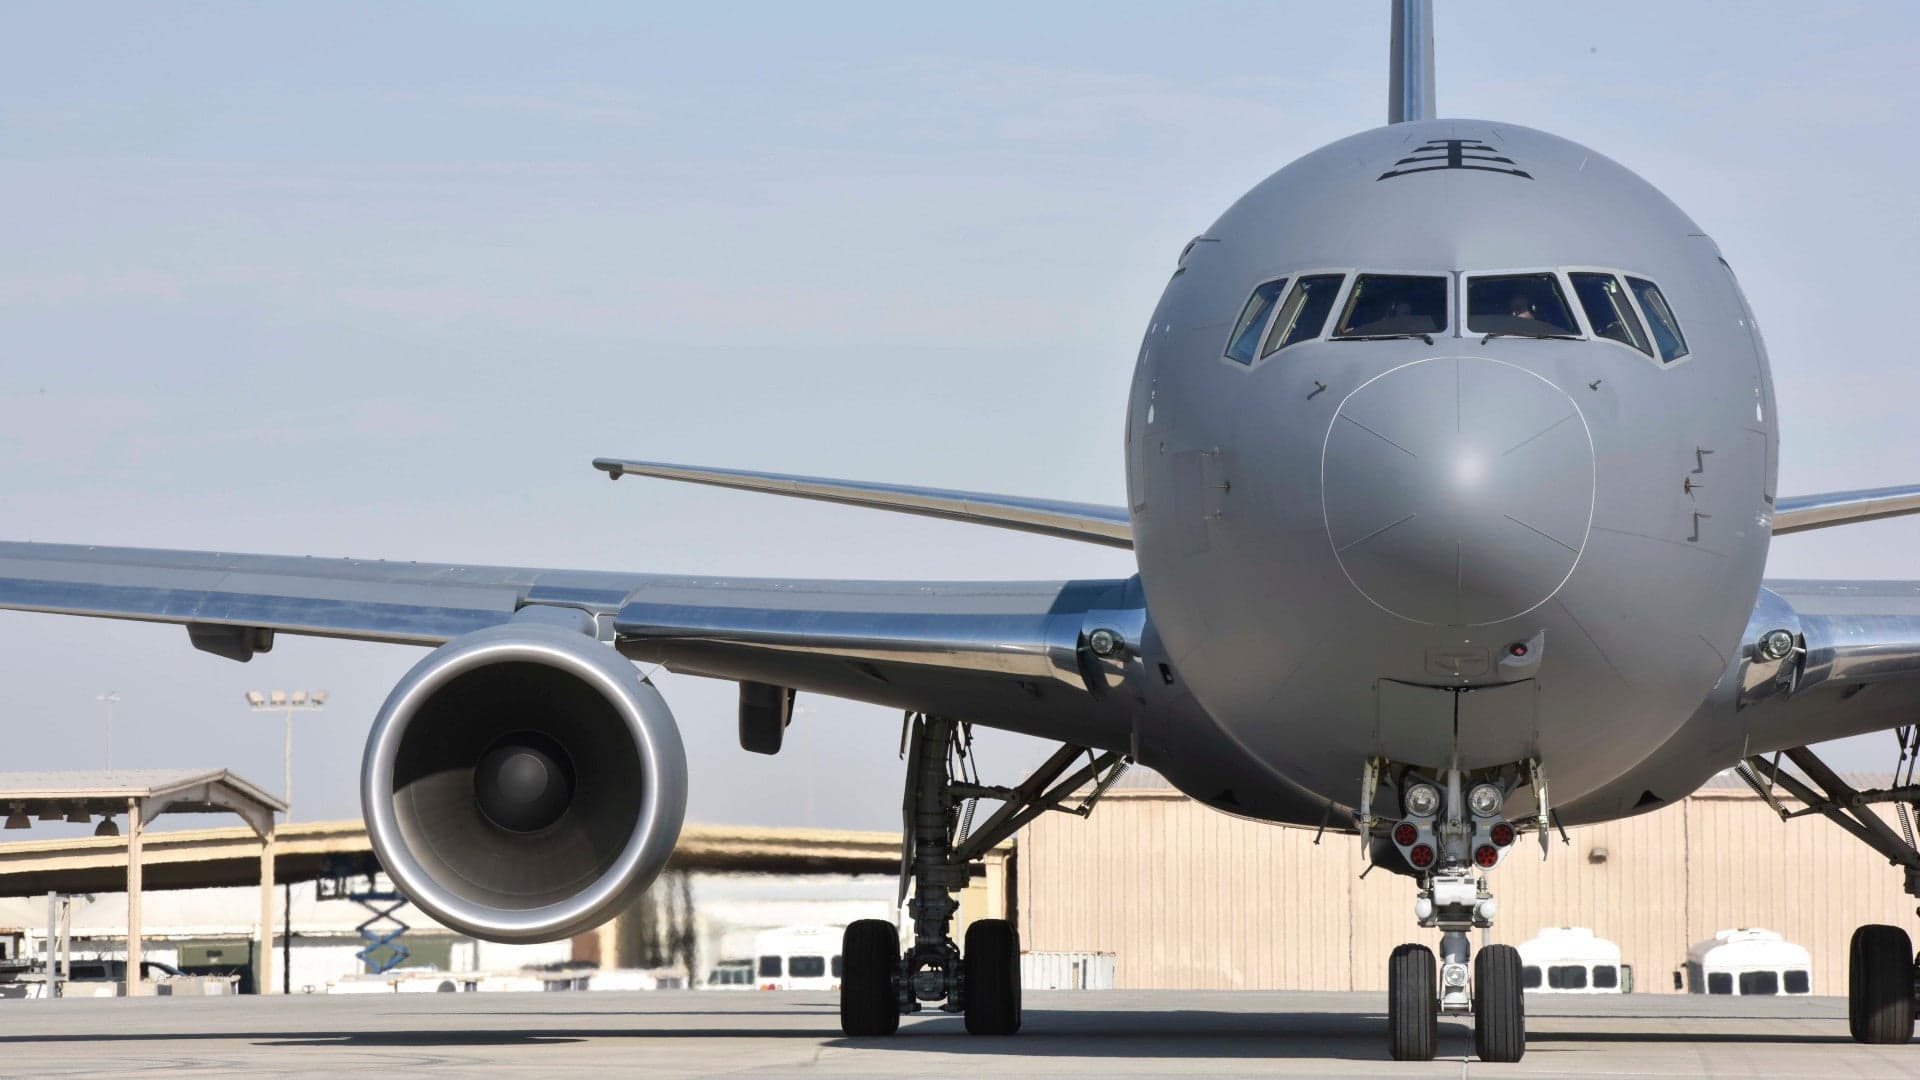 Sale Of KC-46 Tanker To Israel Approved While New Delays For Key Fixes Revealed